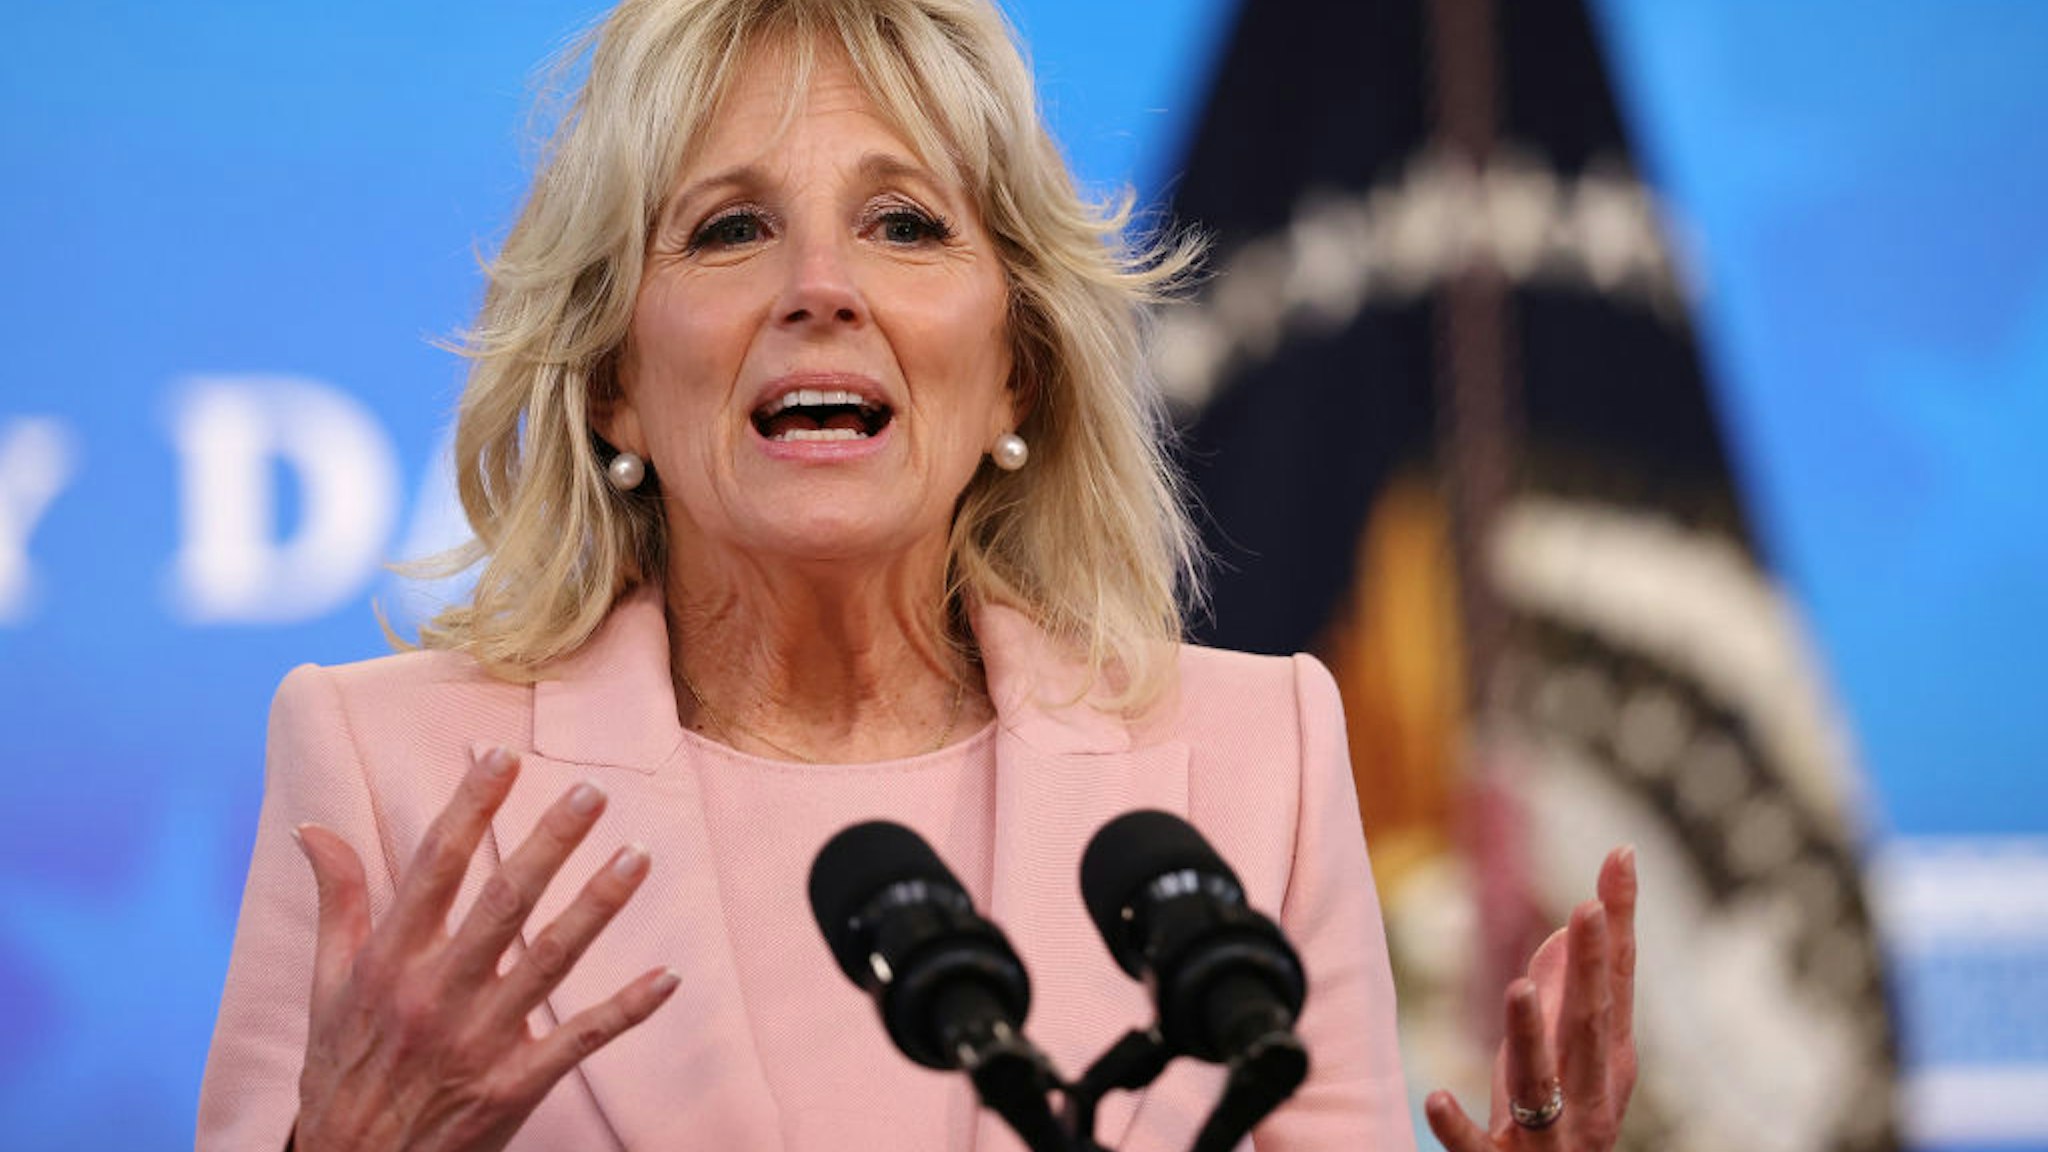 U.S. first lady Jill Biden delivers remarks during an Equal Pay Day event in the South Court Auditorium in the Eisenhower Executive Office Building on March 24, 2021 in Washington, DC.